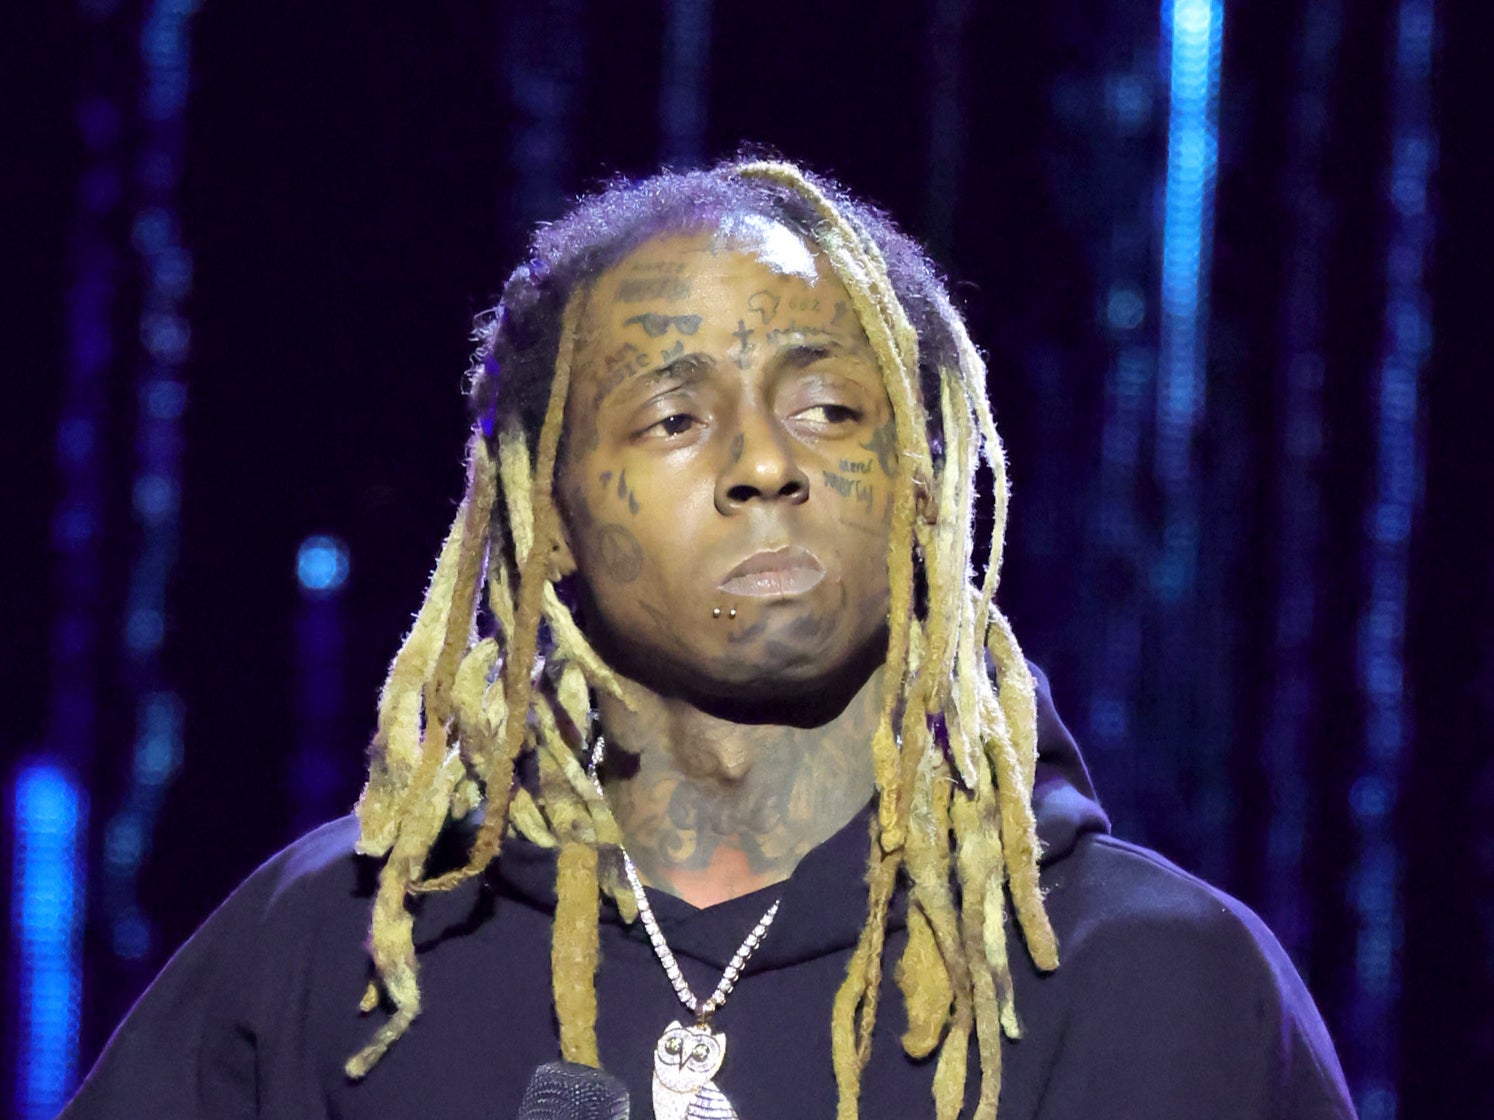 Lil Wayne ends gig ‘after just 30 minutes’ due to reported frustration